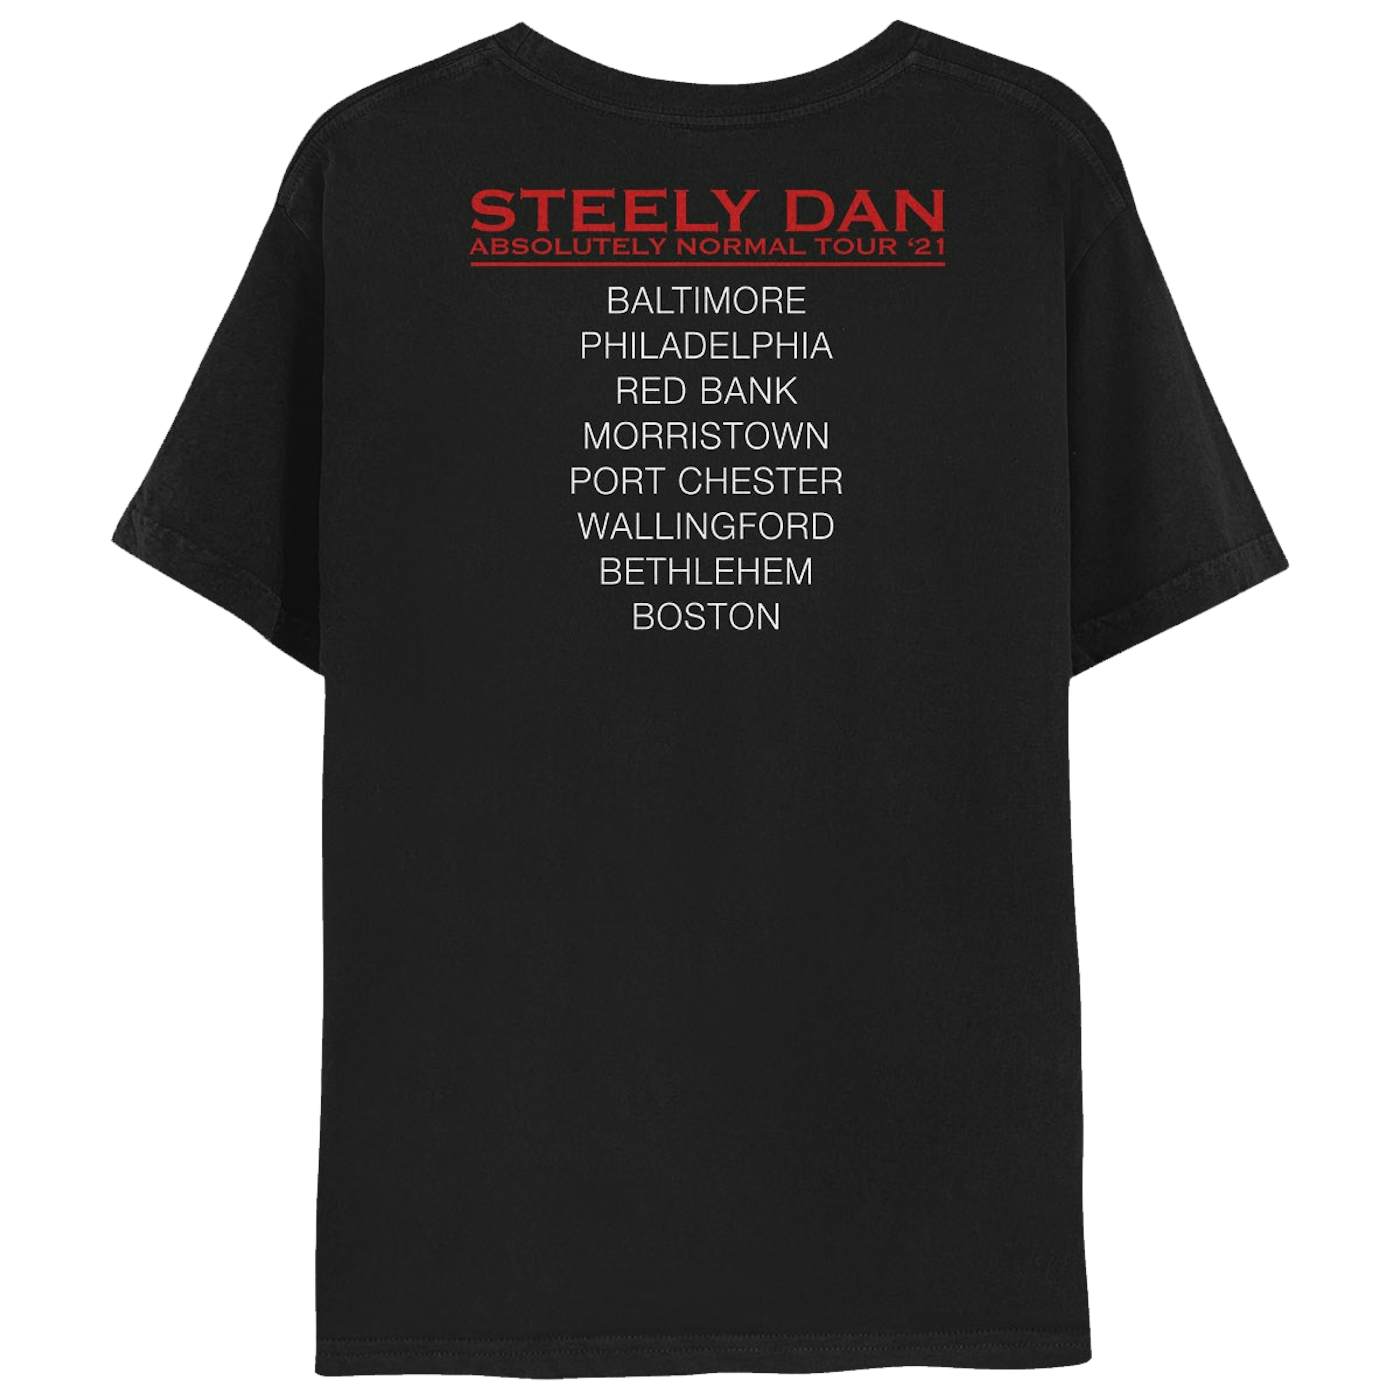 Steely Dan Absolutely Normal '21 Tour Tee